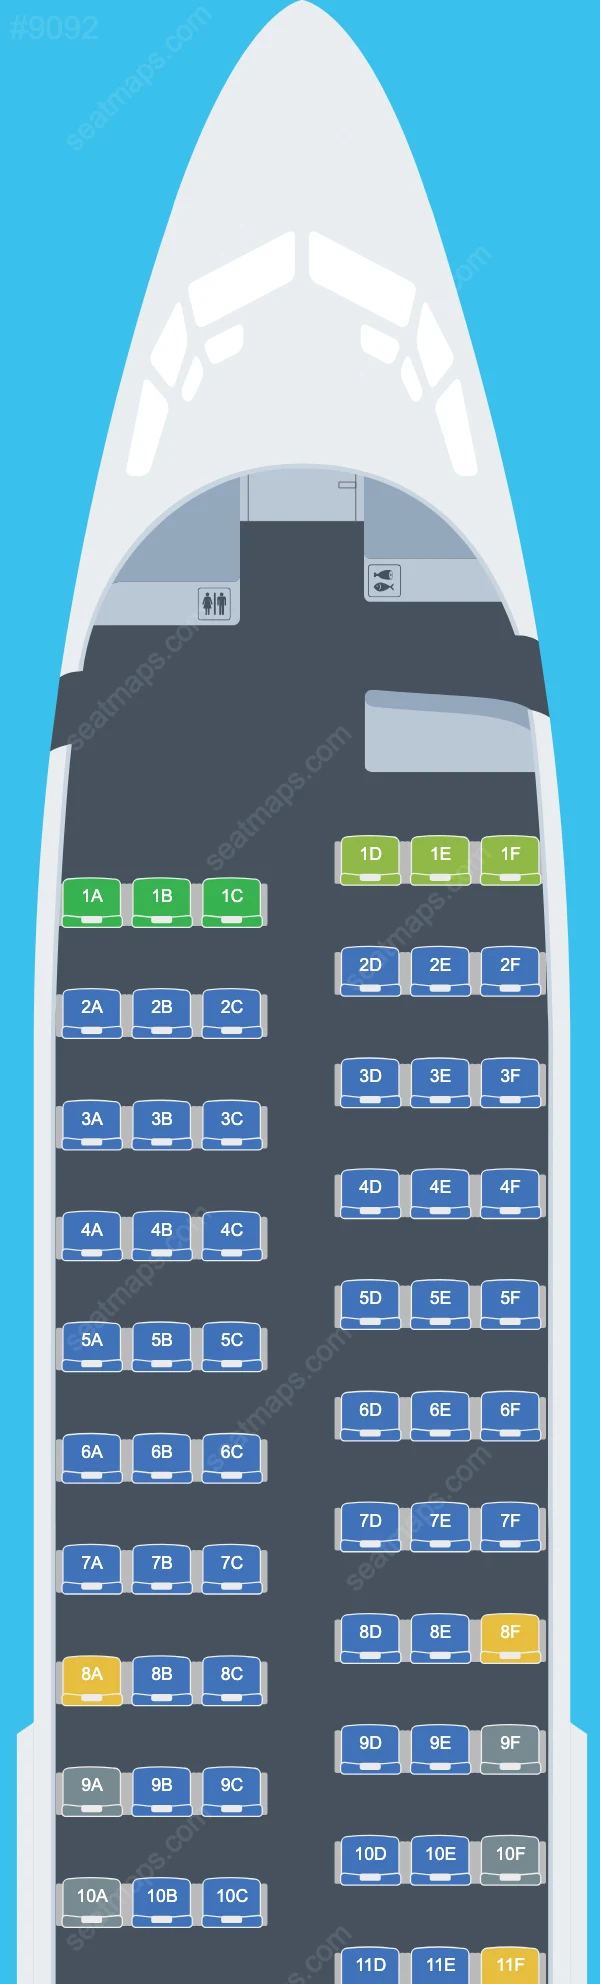 Yakutia Airlines Boeing 737-700 seatmap preview